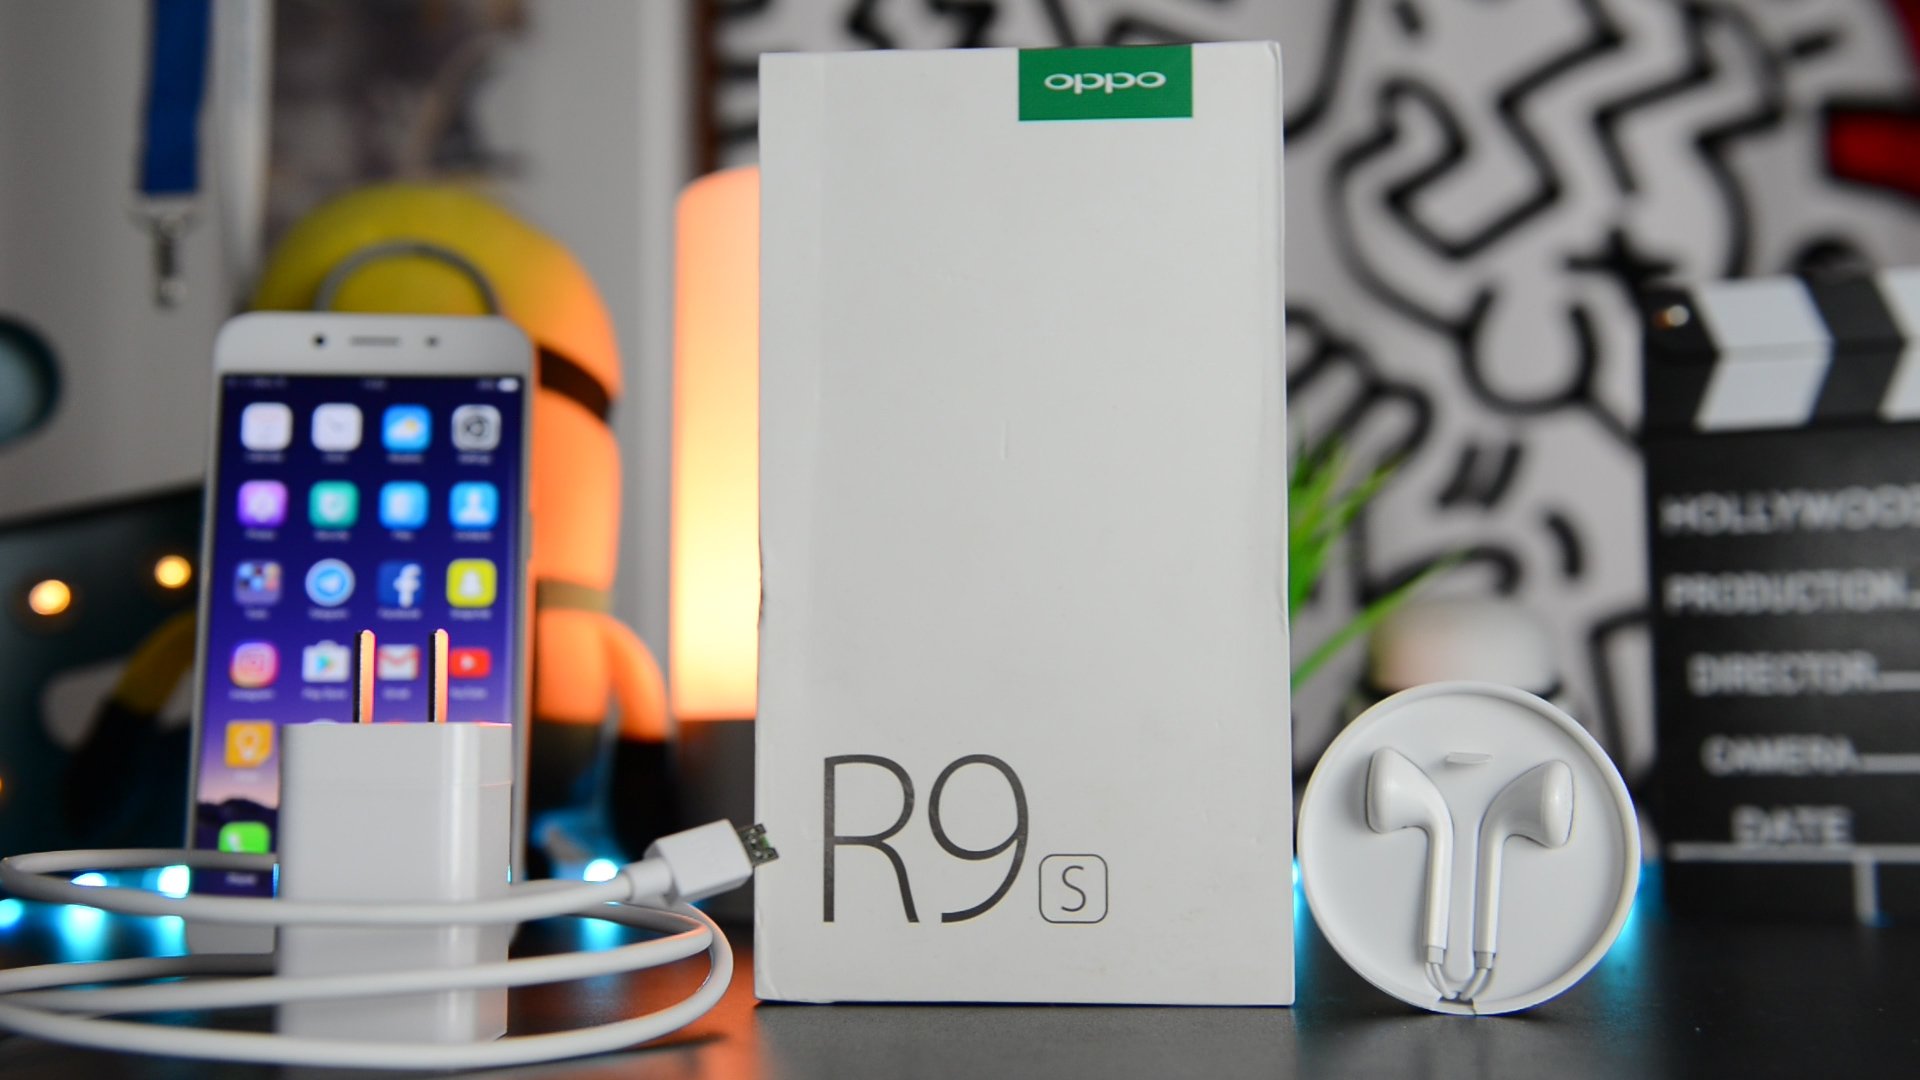 OPPO-R9S-UNBOXING